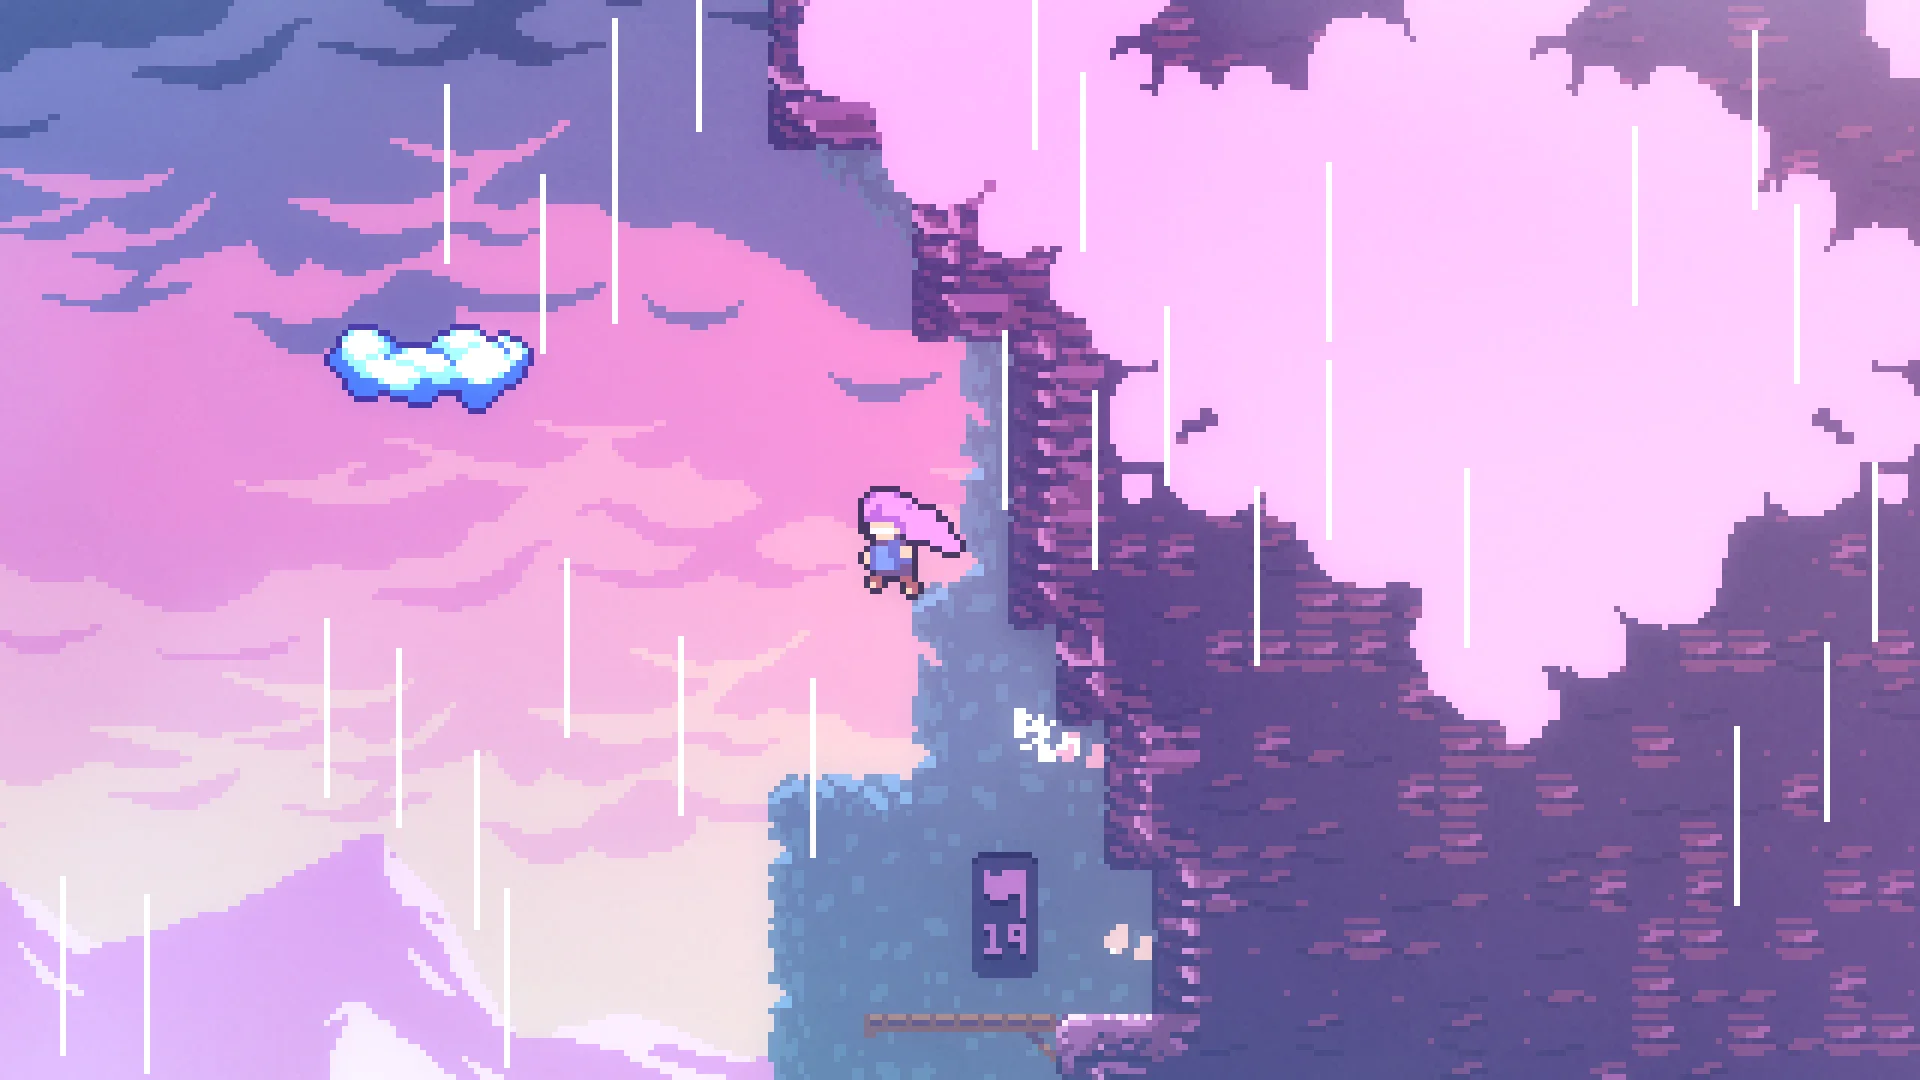 The psychological value of failing in Celeste